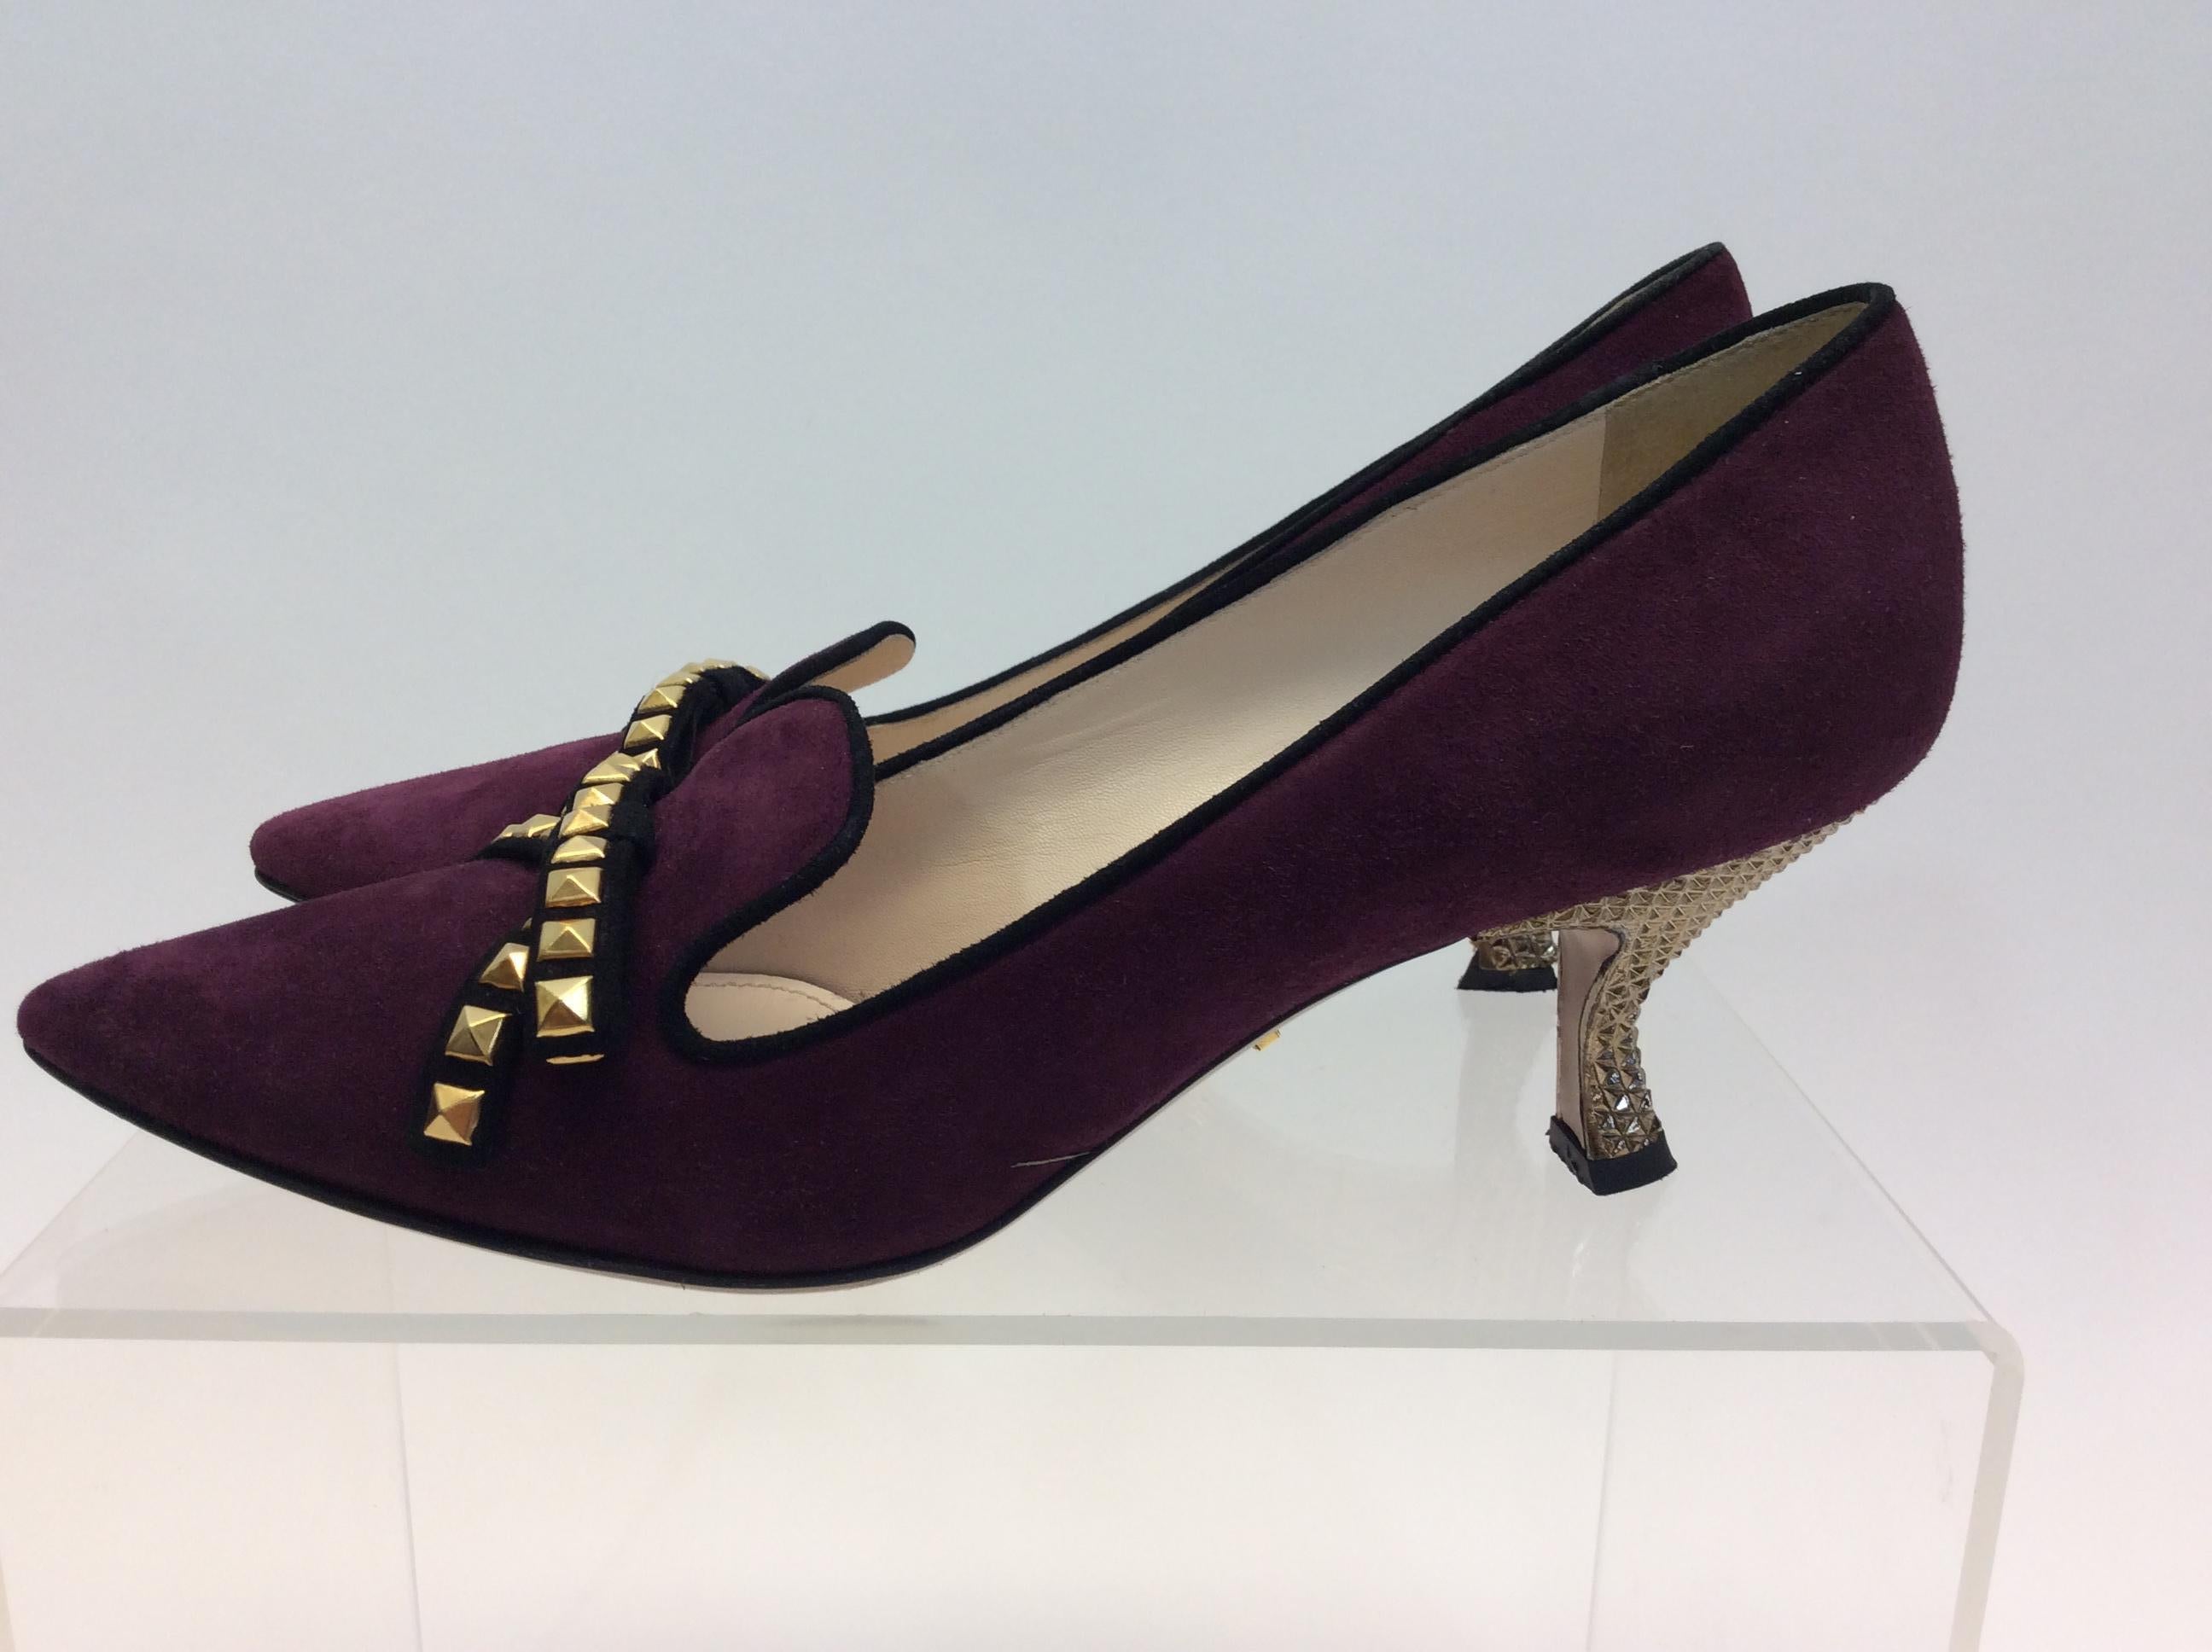 Prada Burgundy Suede Studded Pump
Made in Italy
Suede
Size 37.5
2